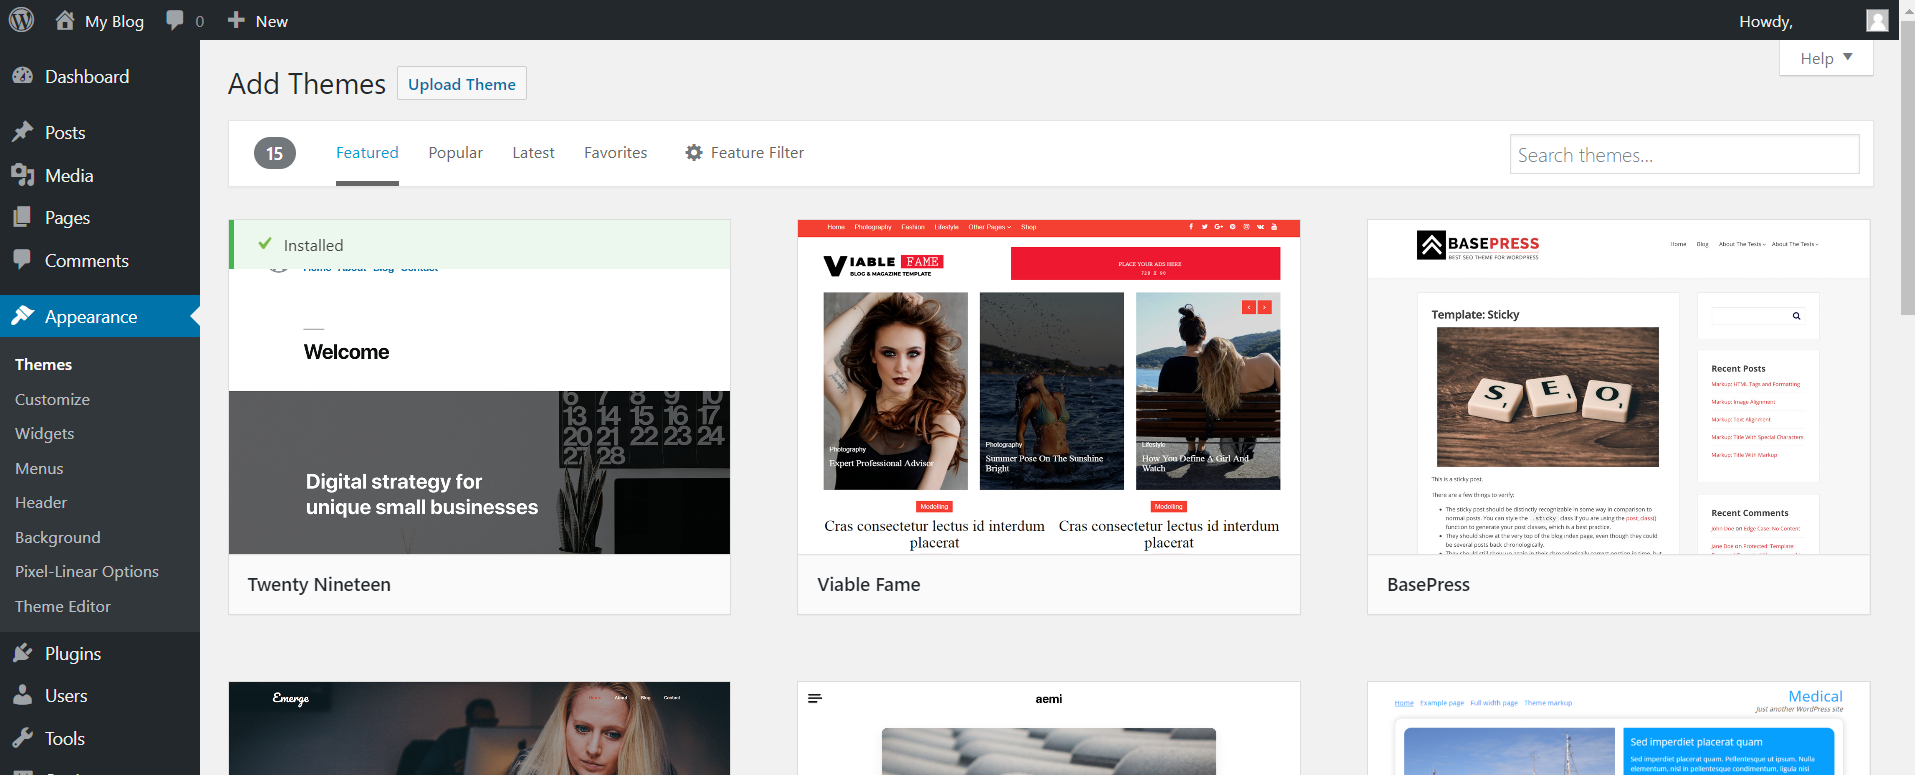 How to add a new theme to your WordPress site